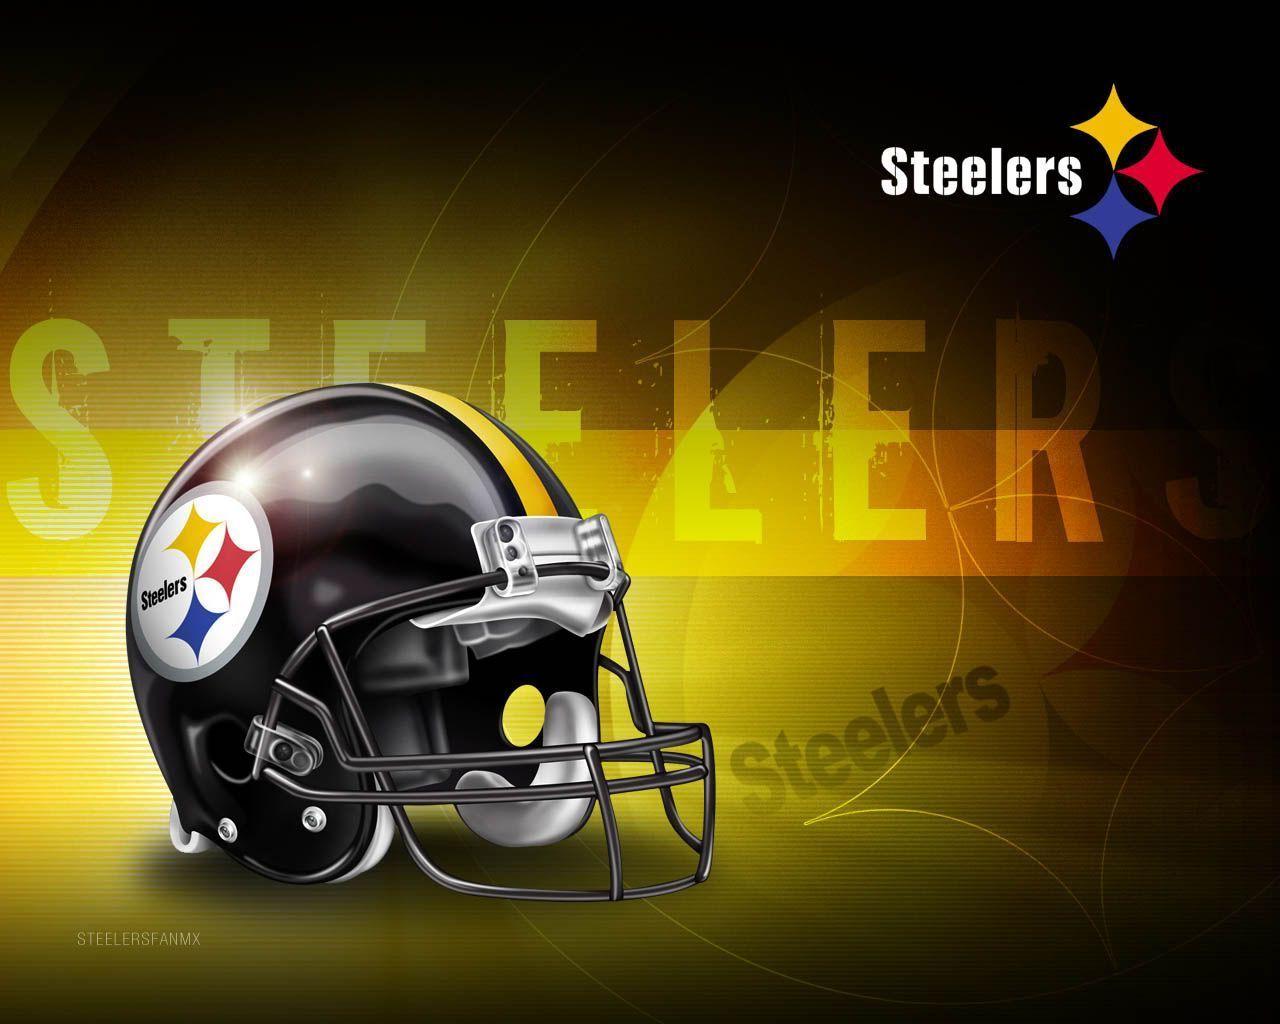 steelers wallpapers – 1280×1024 High Definition Wallpapers